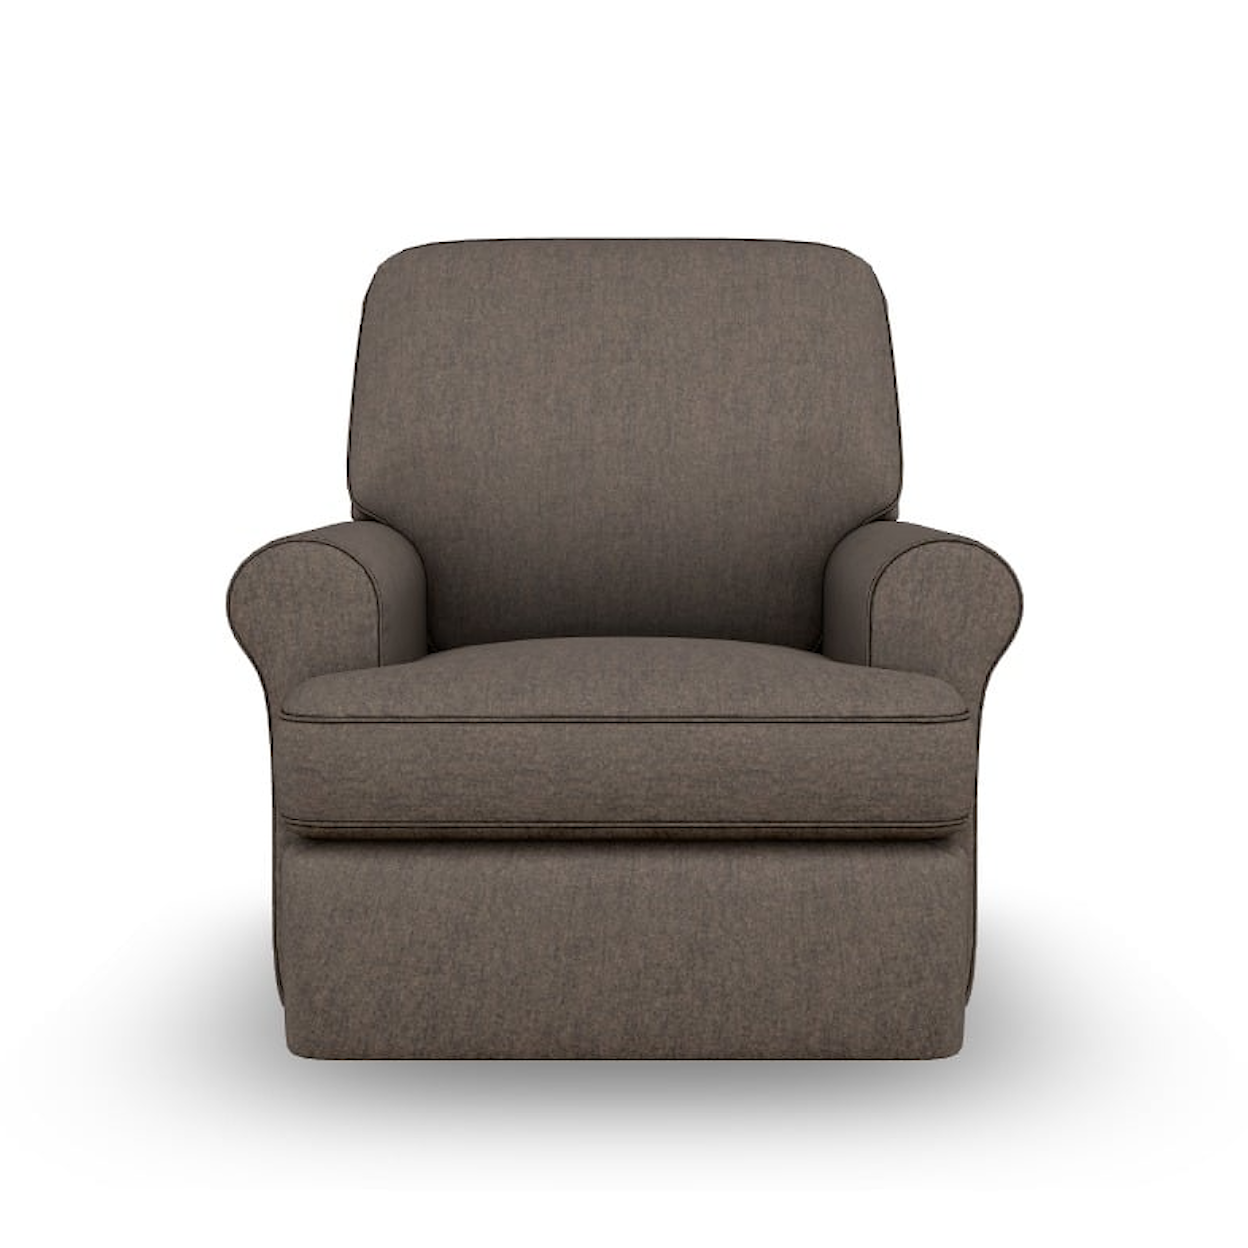 Best Home Furnishings Audrey Swivel Gliding Recliner